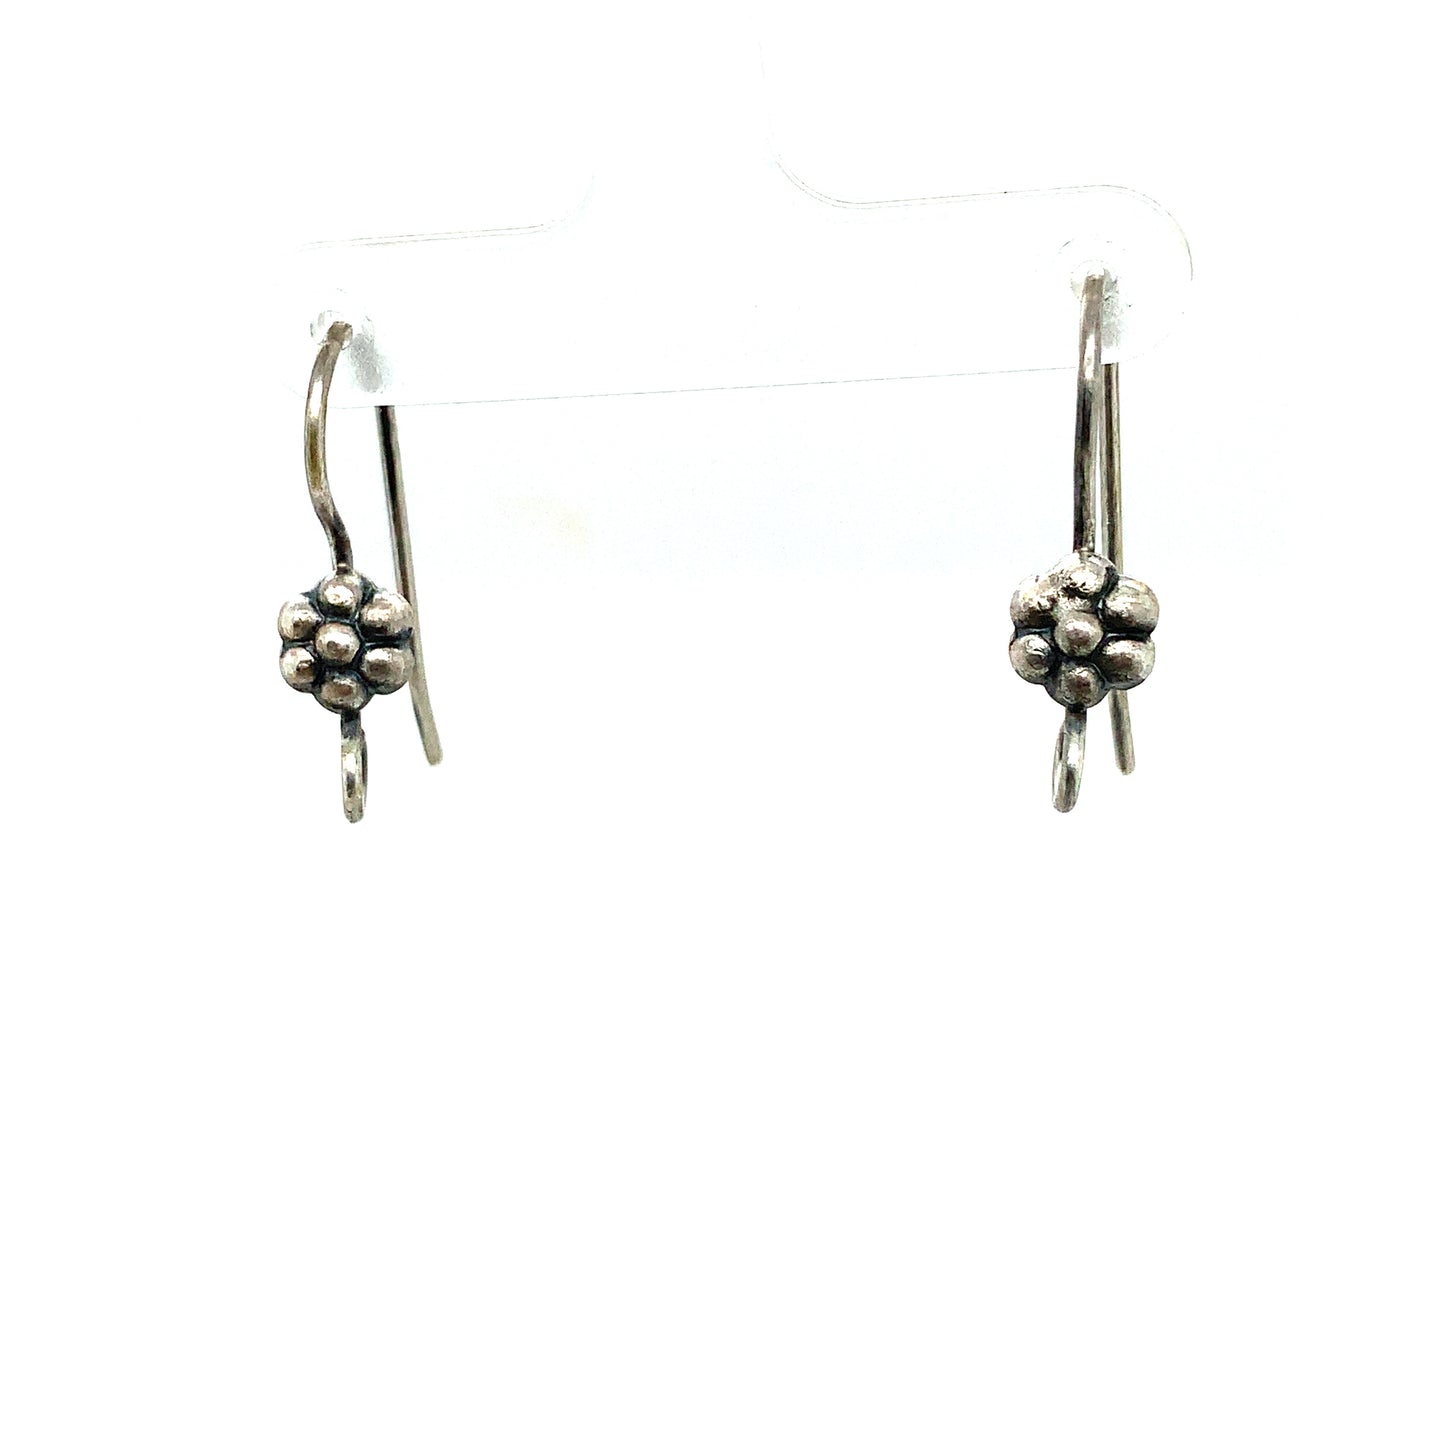 Components 332 - Handmade Sterling Silver Earring Wires w/ Flowers